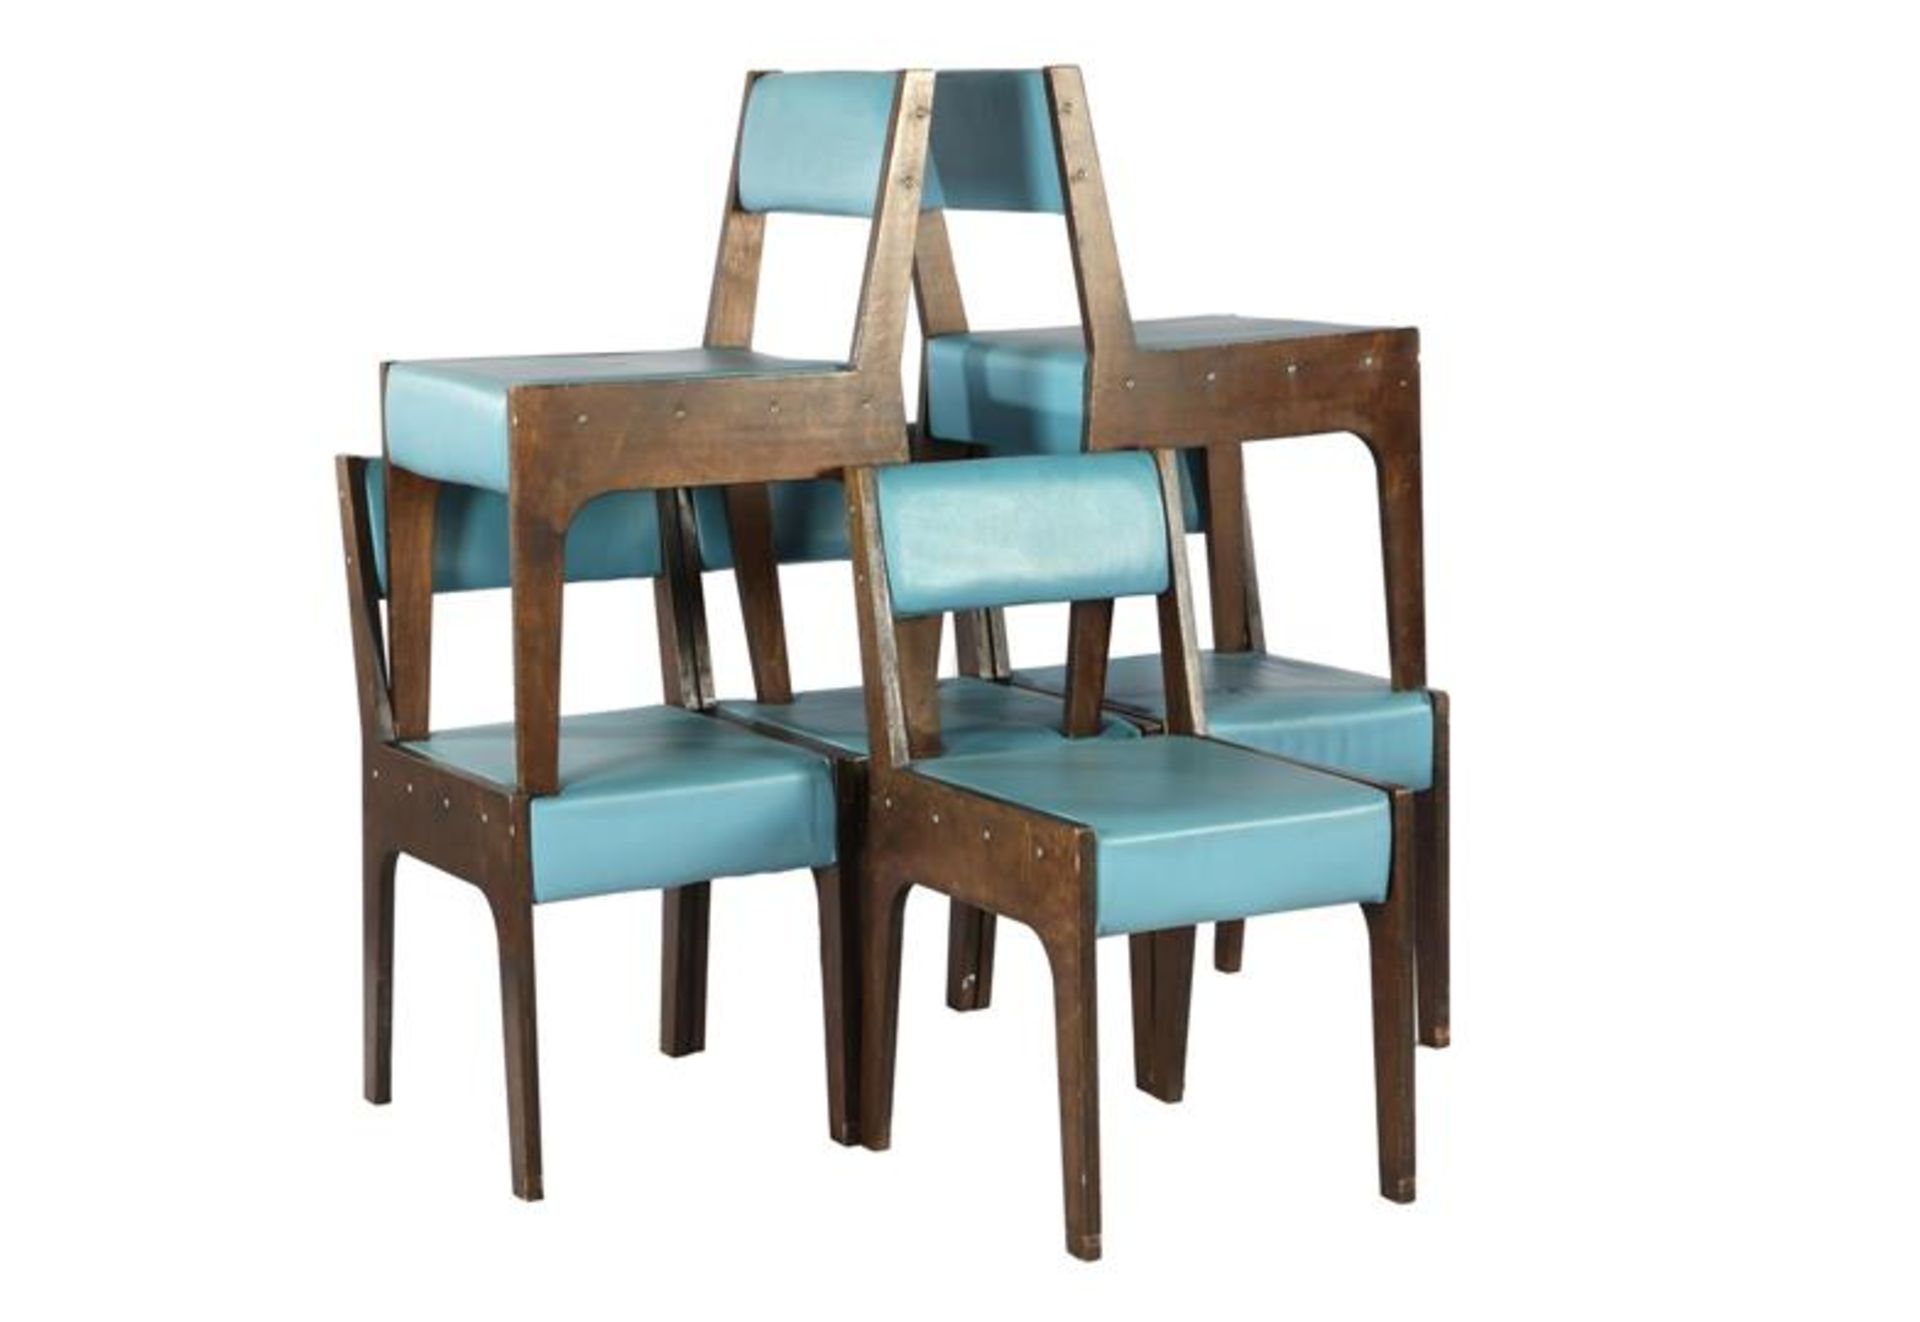 Series of 6 vintage chairs with brown plywood frame and blue vinyl upholstery